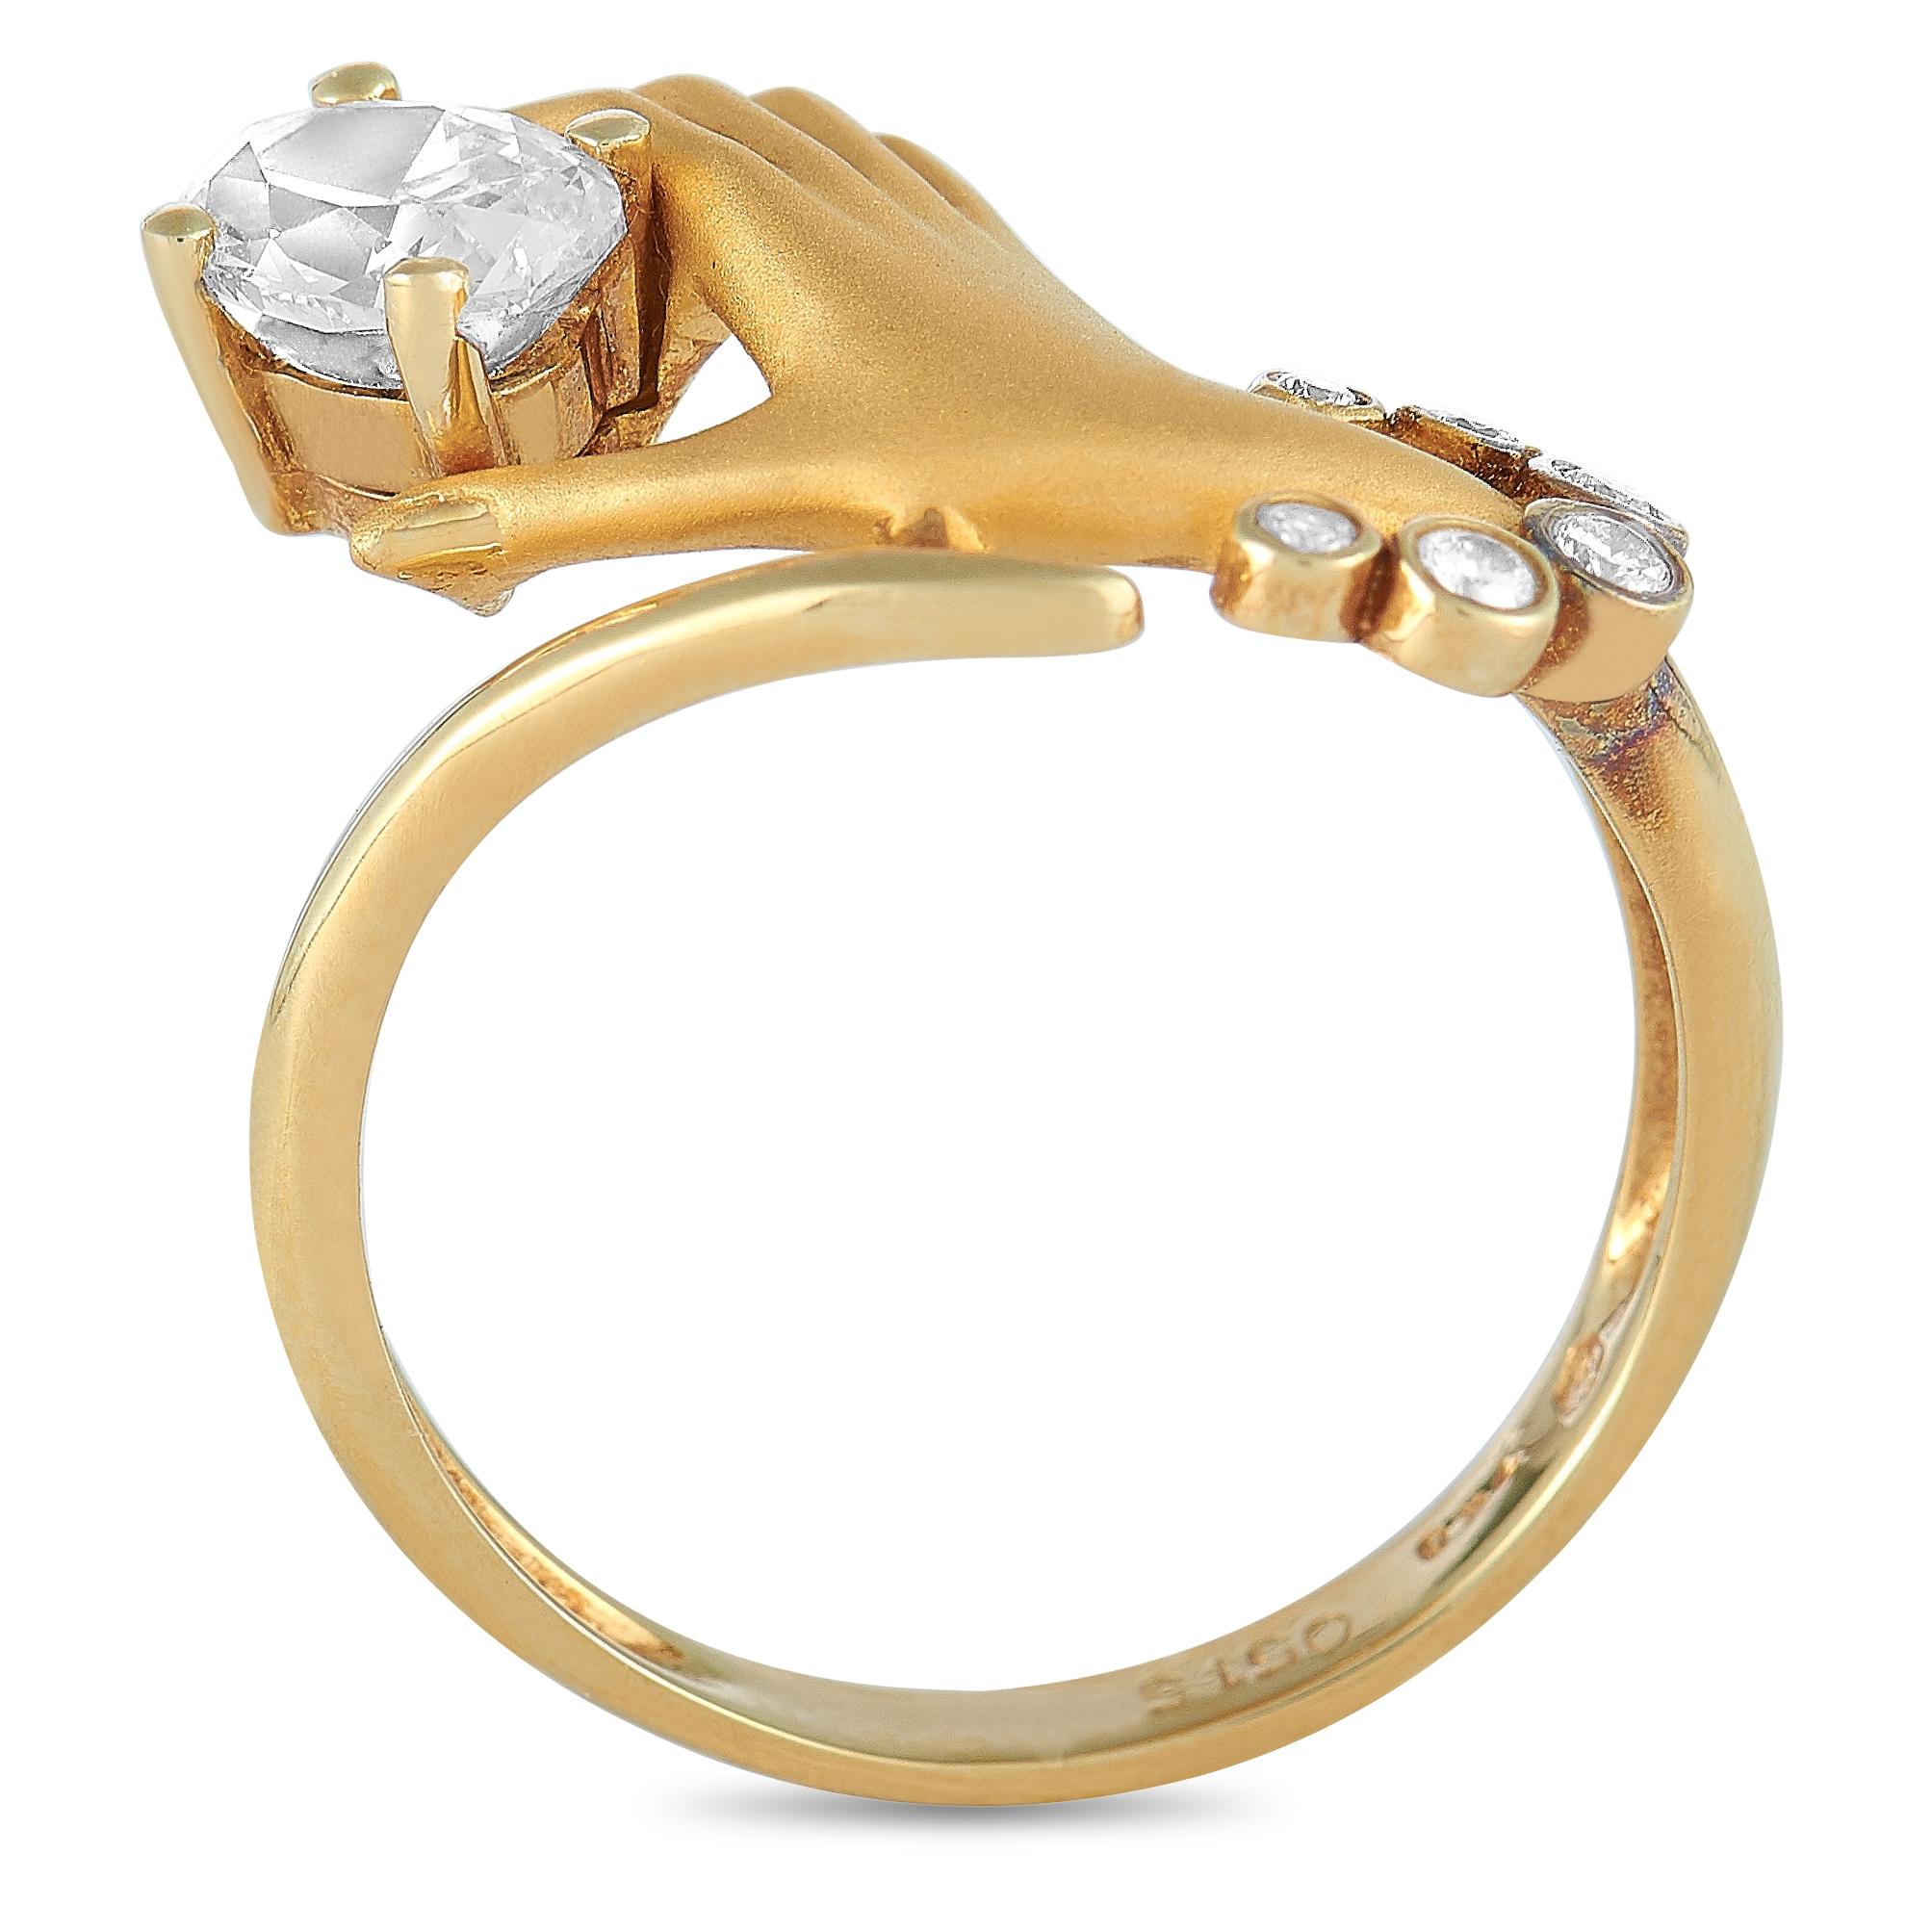 This Carrera y Carrera hand ring is crafted from 18K yellow gold and weighs 4.5 grams. It boasts band thickness of 2 mm and top height of 5 mm, while top dimensions measure 18 by 12 mm. The ring is set with a total of 0.60 carats of diamonds – the